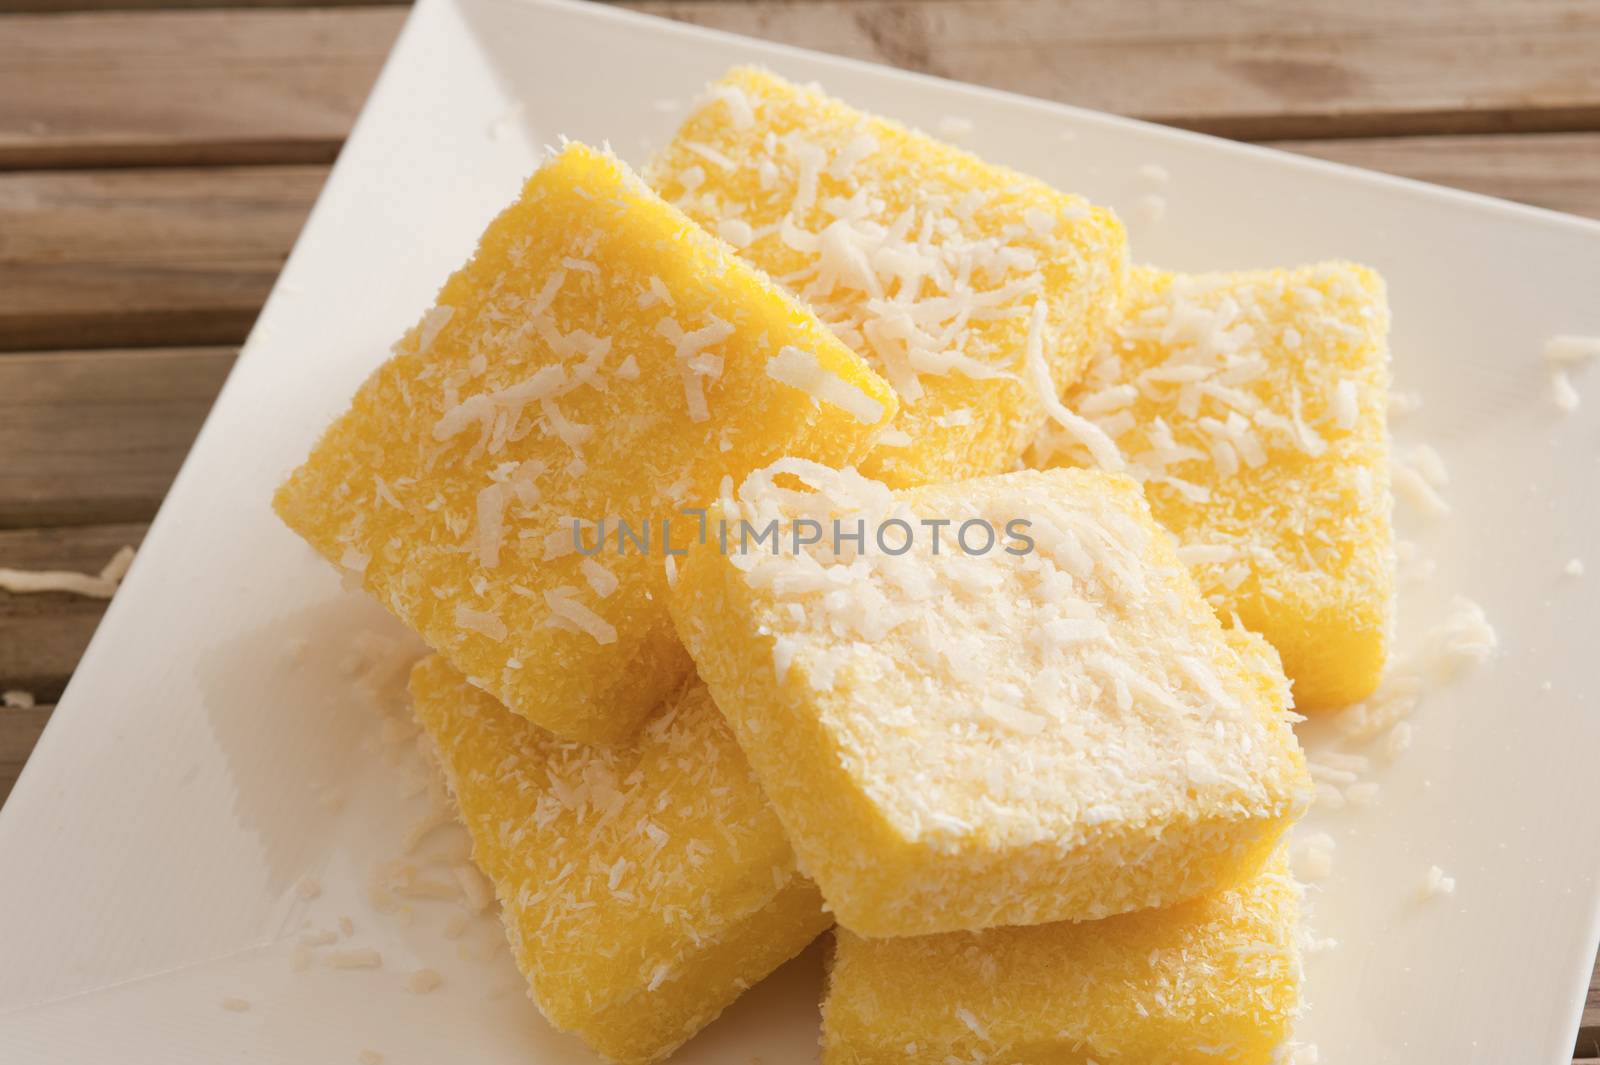 Plate with tasty lemon lamingtons in close up view